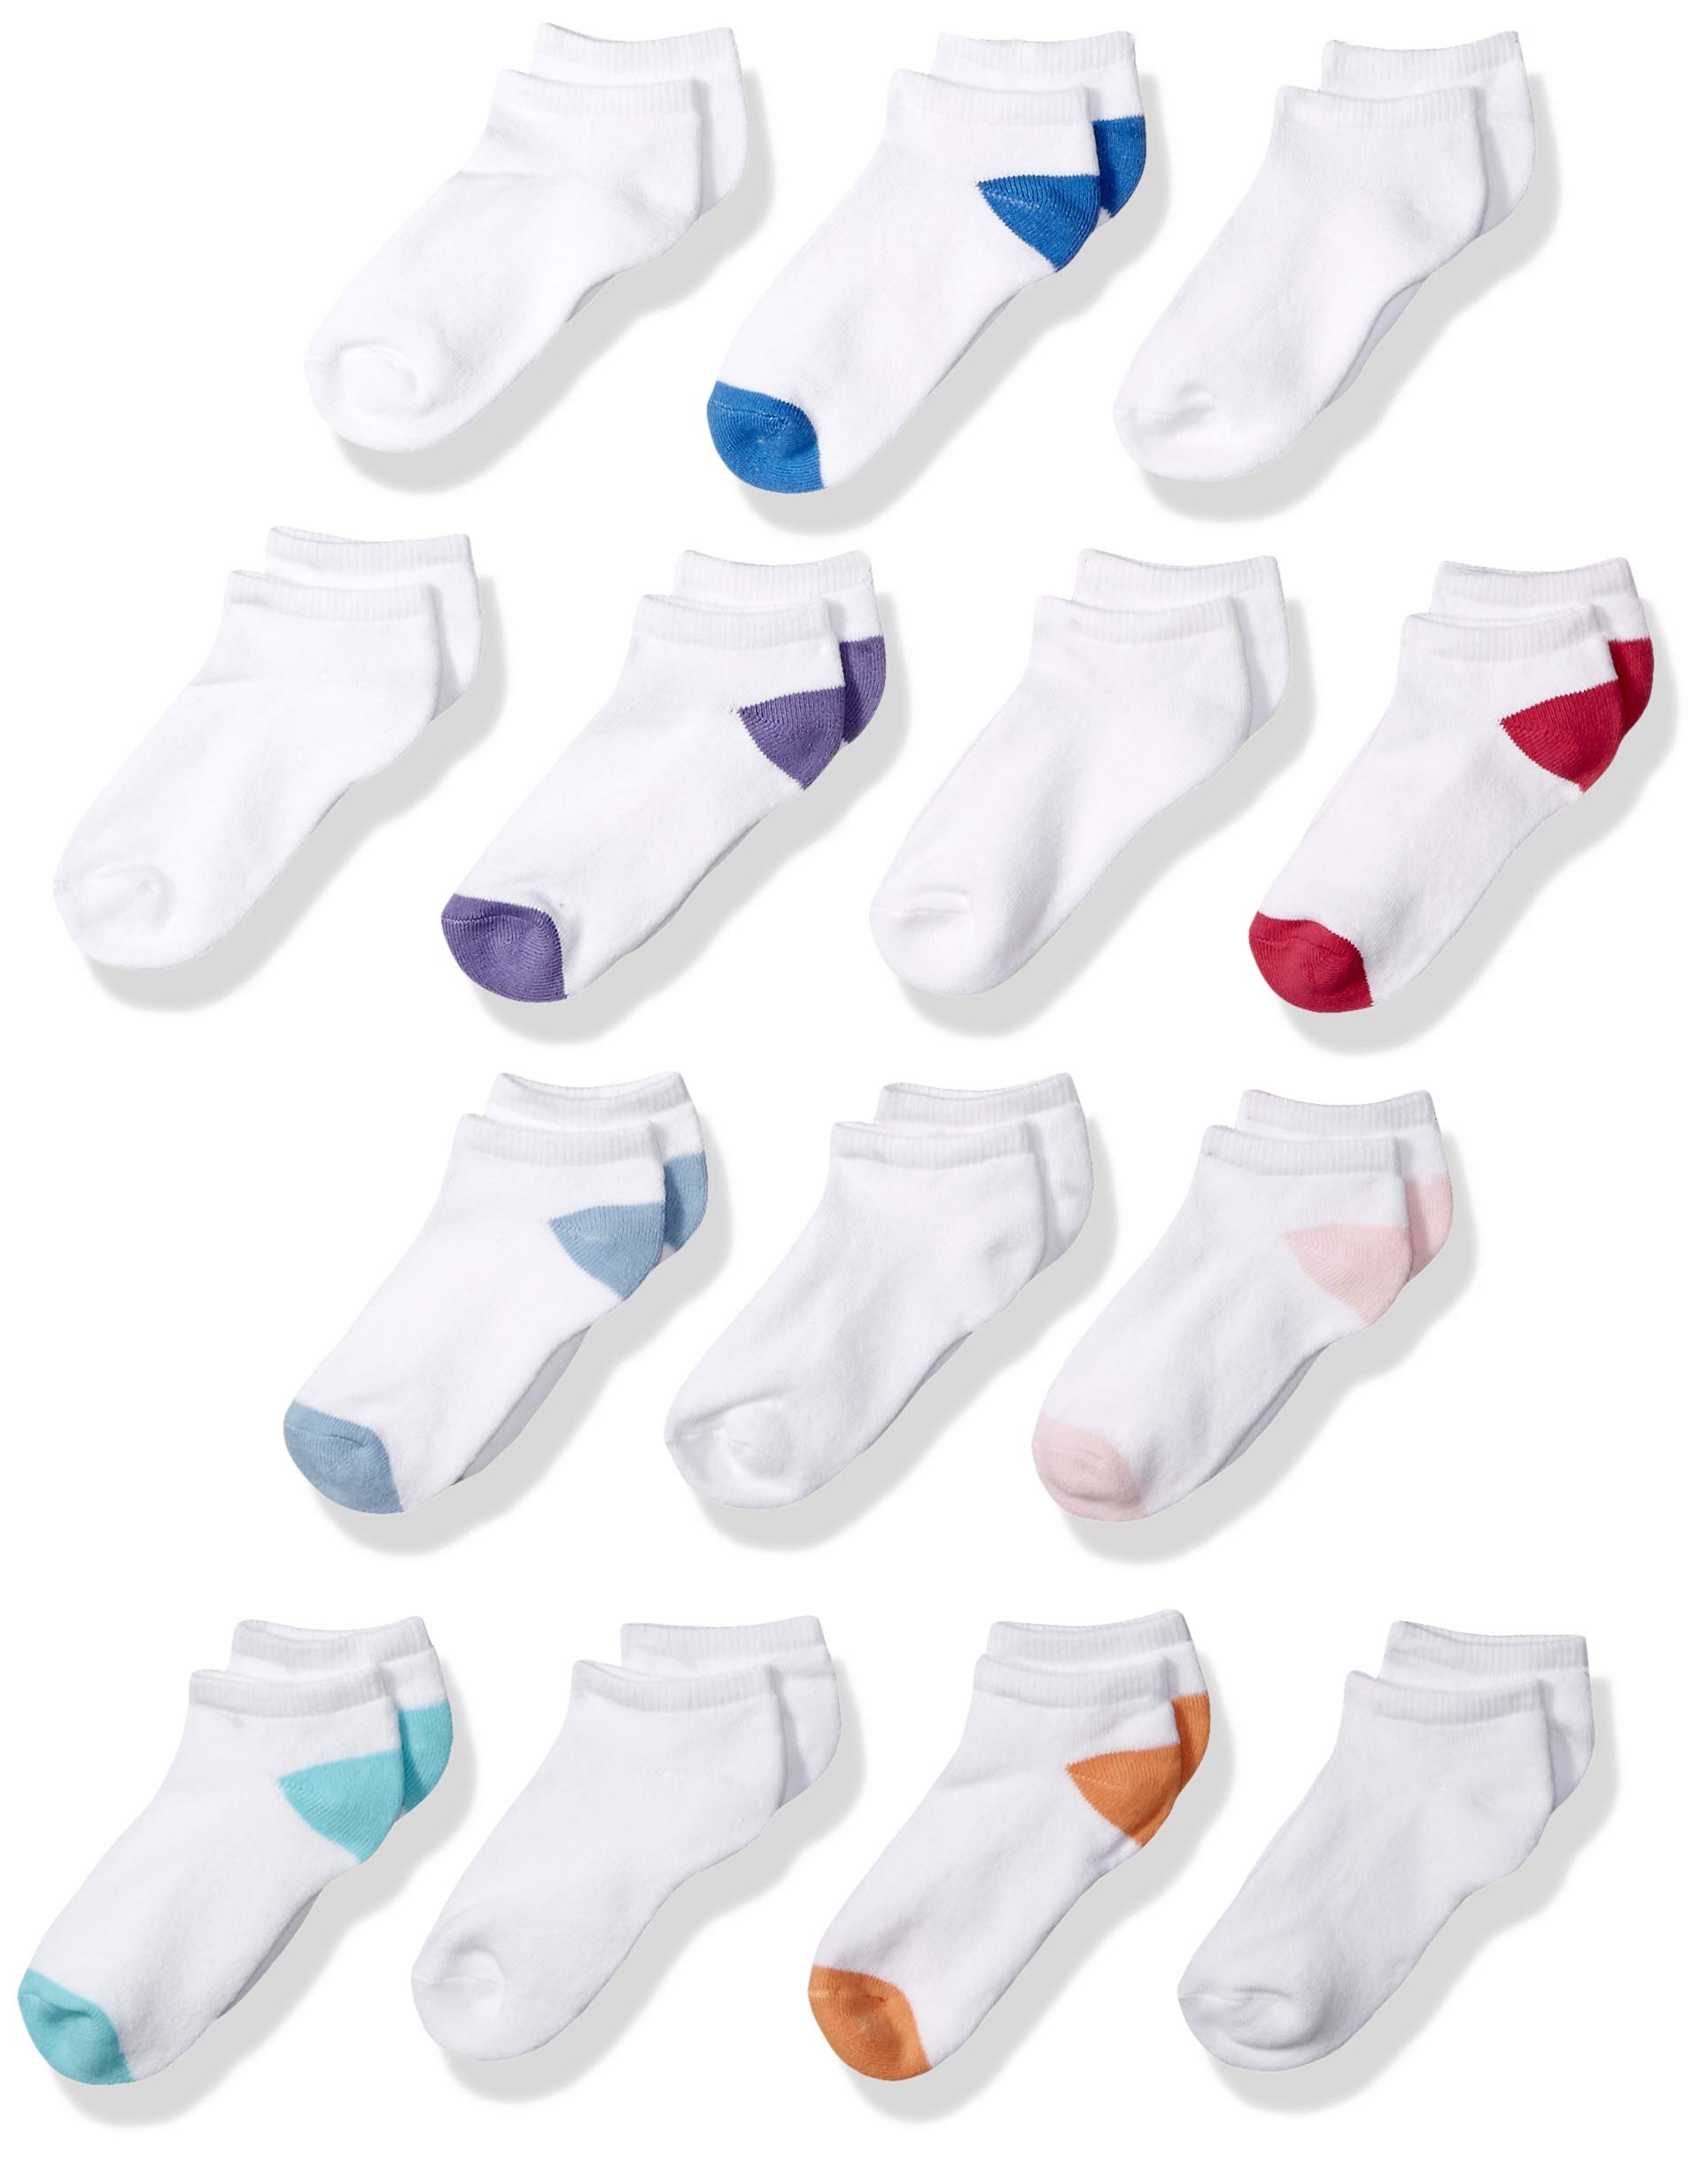 Amazon Essentials Unisex Kids and Toddlers' Cotton Low Cut Sock, 14 Pairs